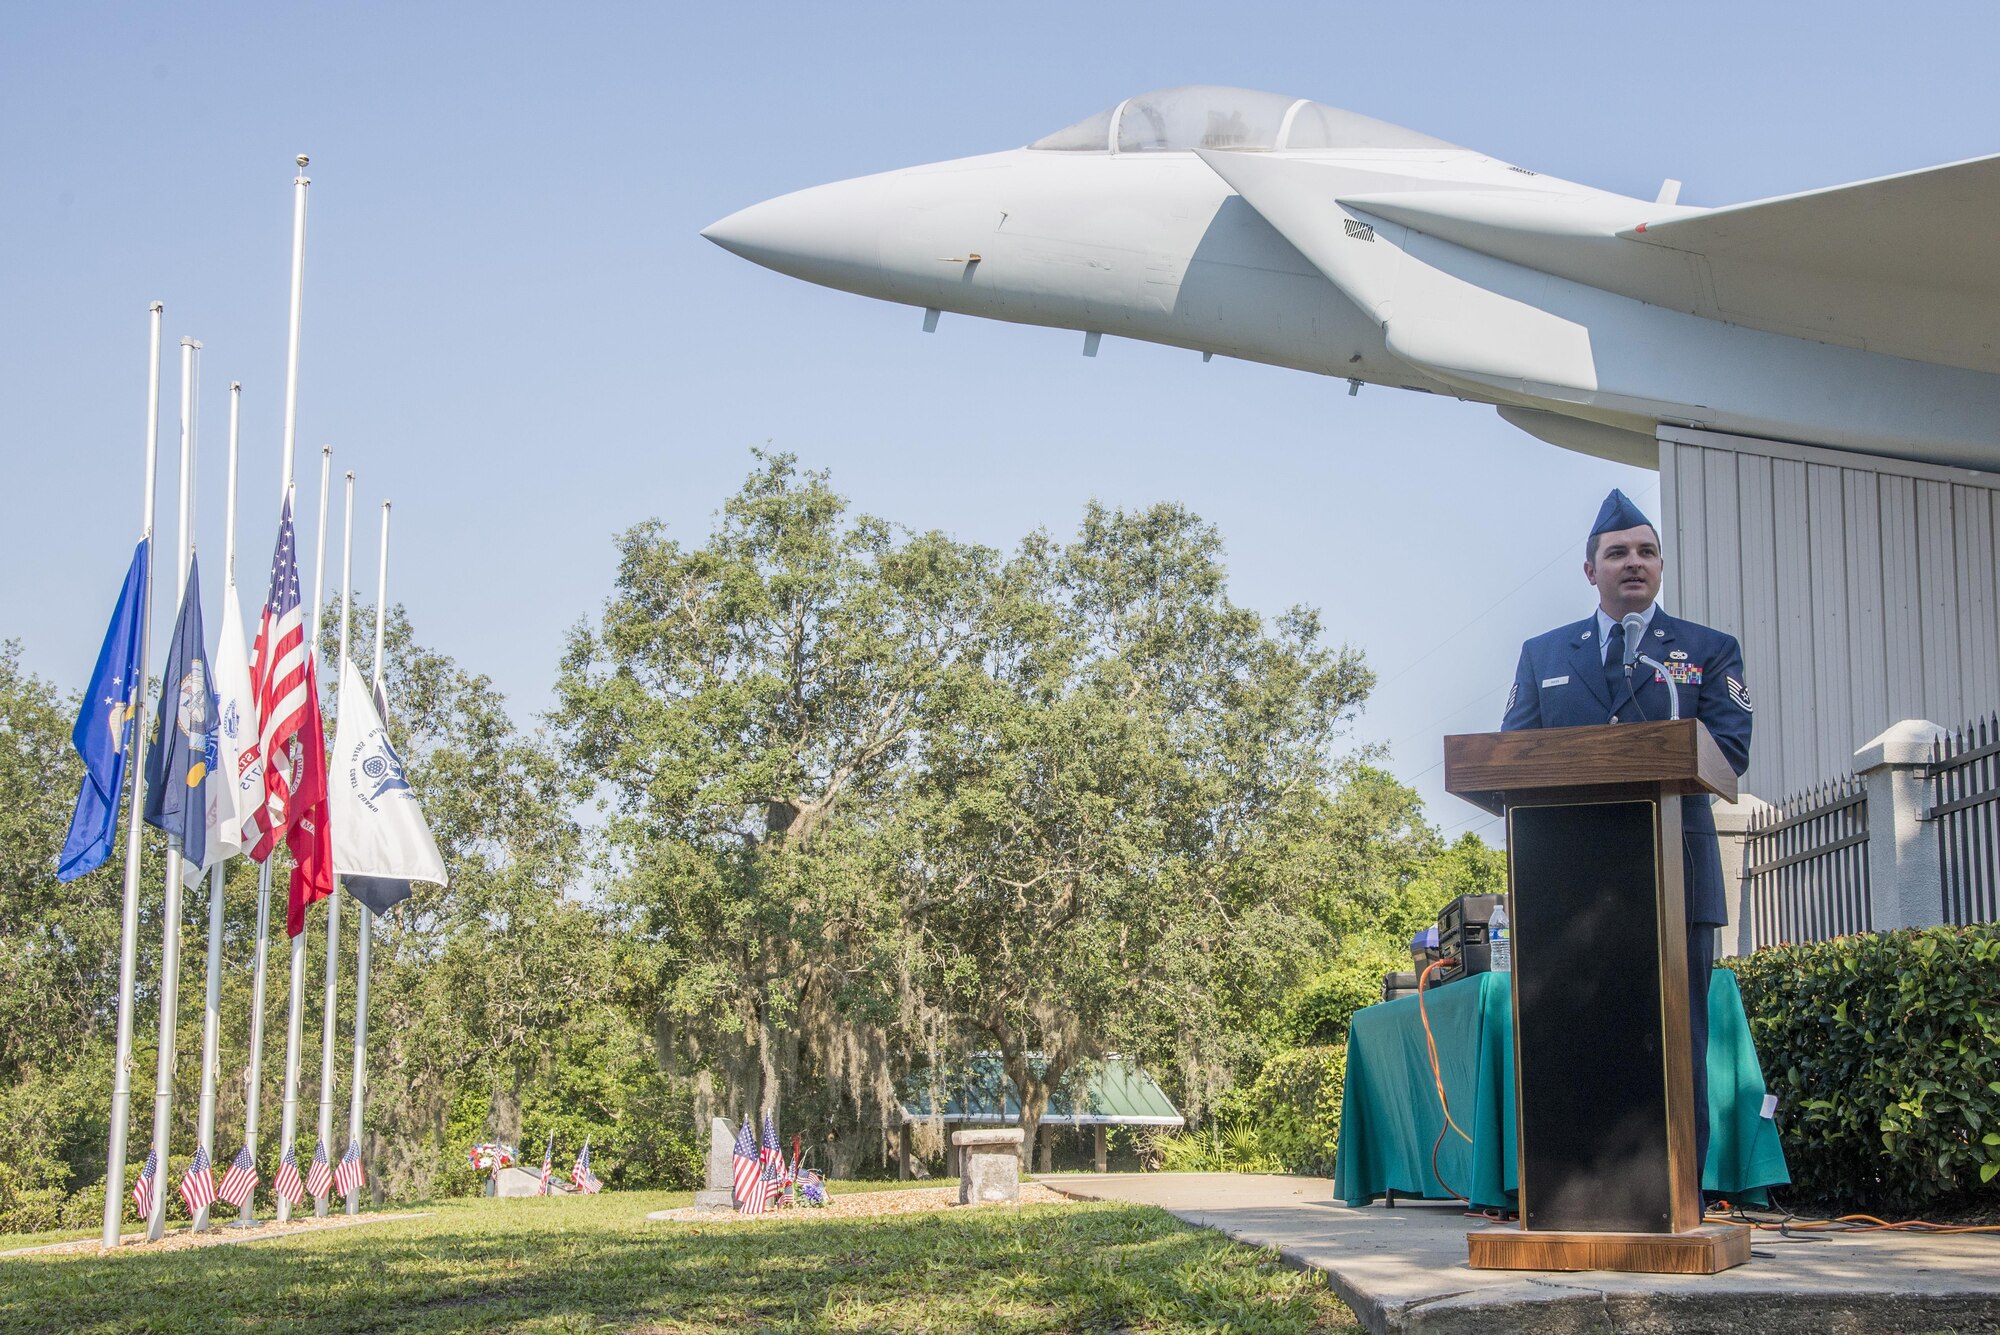 Tech. Sgt. Jody Mann, 33rd Aircraft Maintenance Squadron crew chief, speaks at an aircraft rededication ceremony June 14, 2016, at Memorial Park in DeBary Fla. The aircraft was rededicated in memory of Airman 1st Class Brian McVeigh, a member of the 33rd Fighter Wing, who was killed in the Khobar Towers terrorist attack in 1996. (U.S. Air Force photo by Senior Airman Stormy Archer/Released)